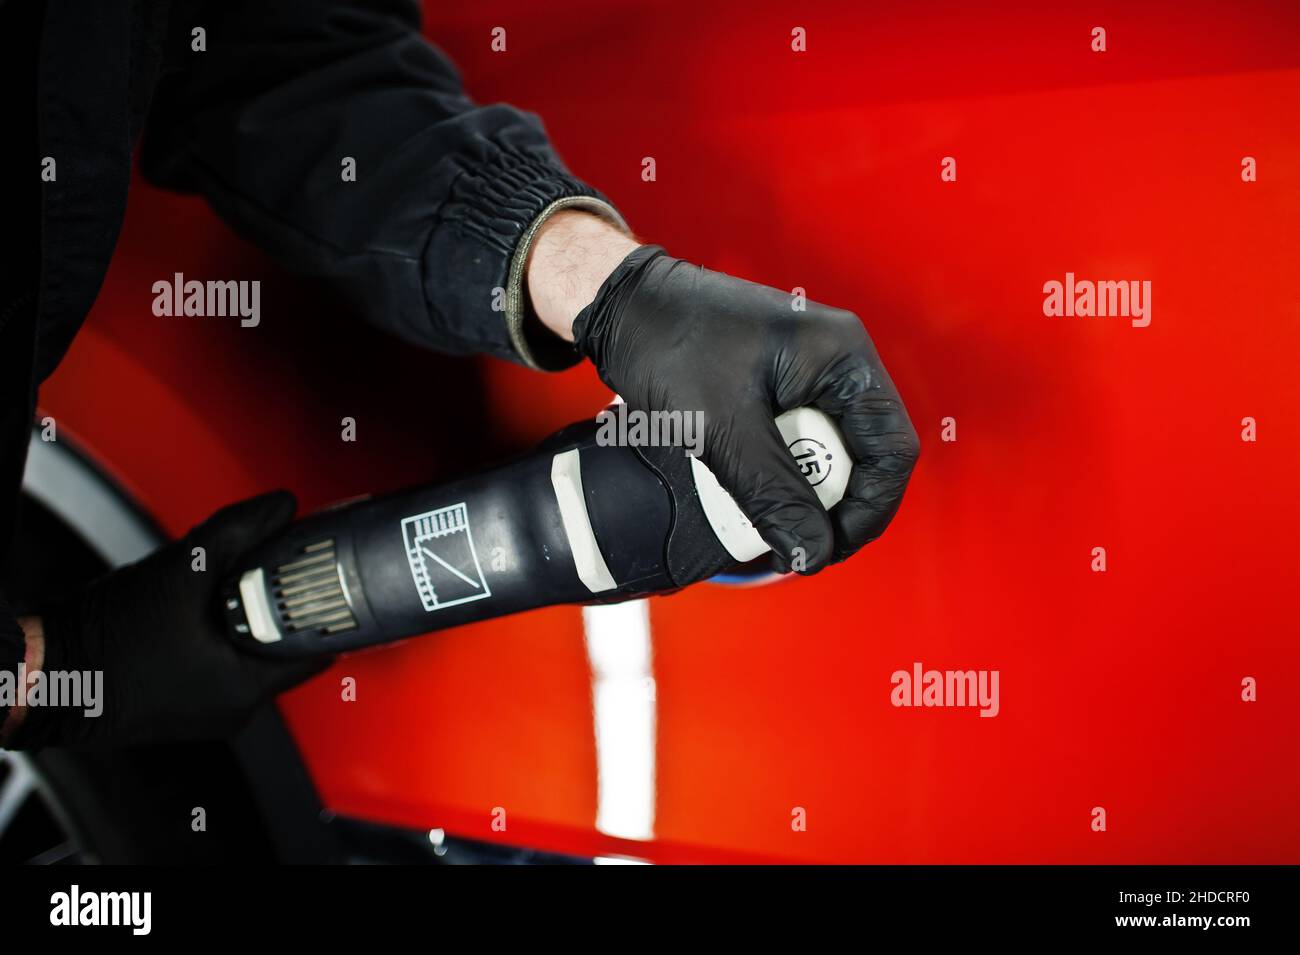 Car detailing concept. Hands of man with orbital polisher in repair shop polishing orange suv car. Stock Photo